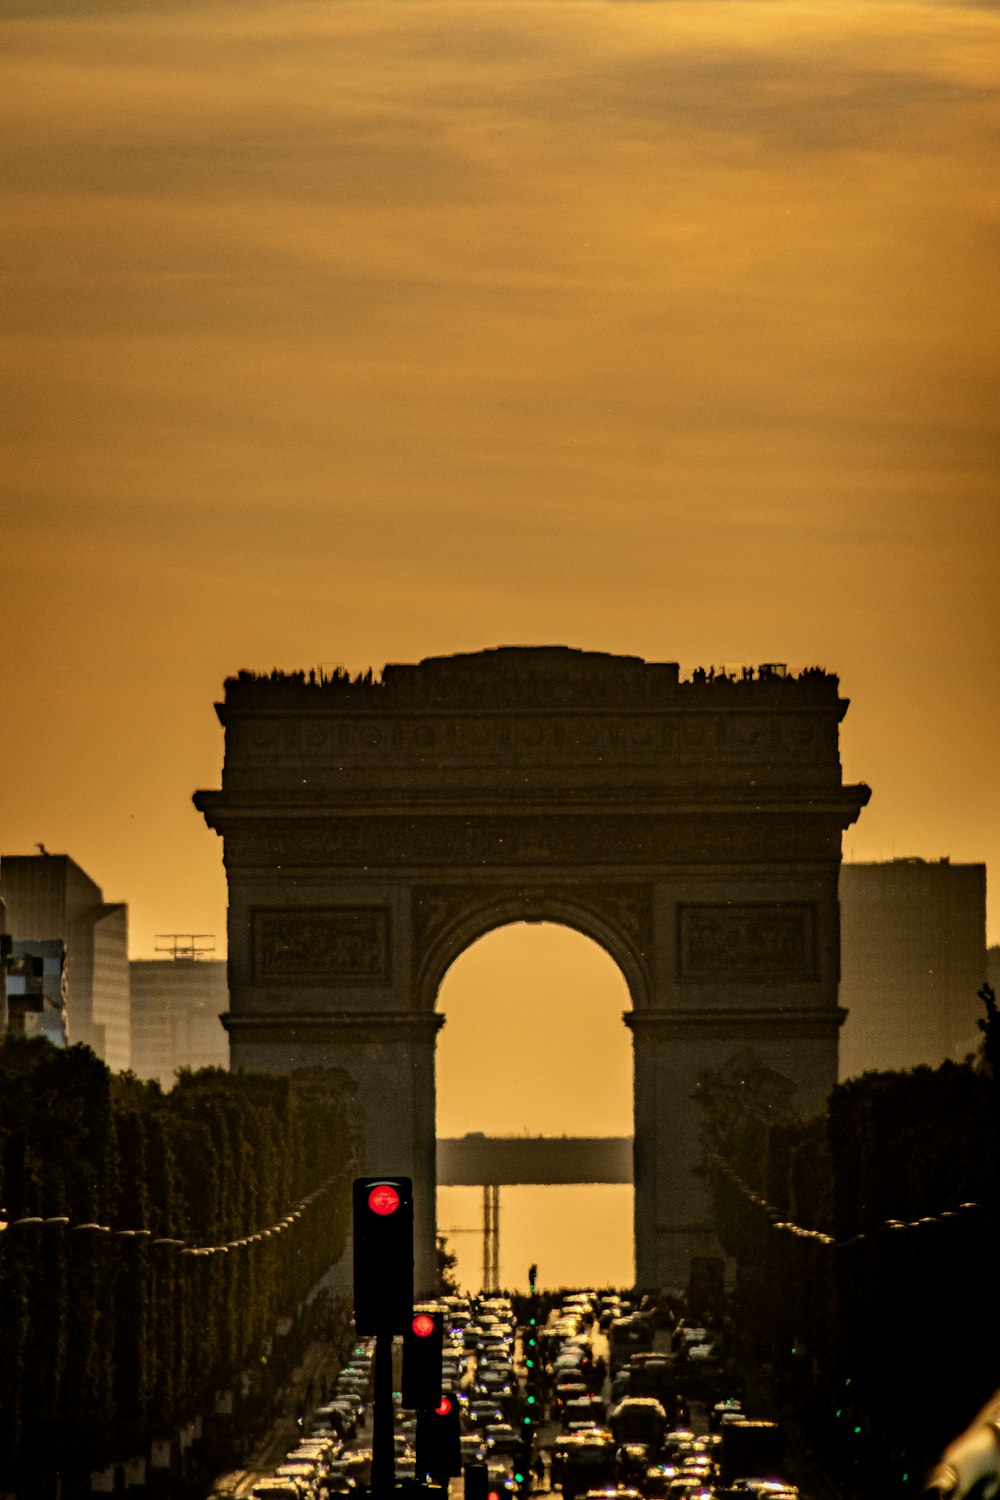 a traffic jam in front of the arc of triumph